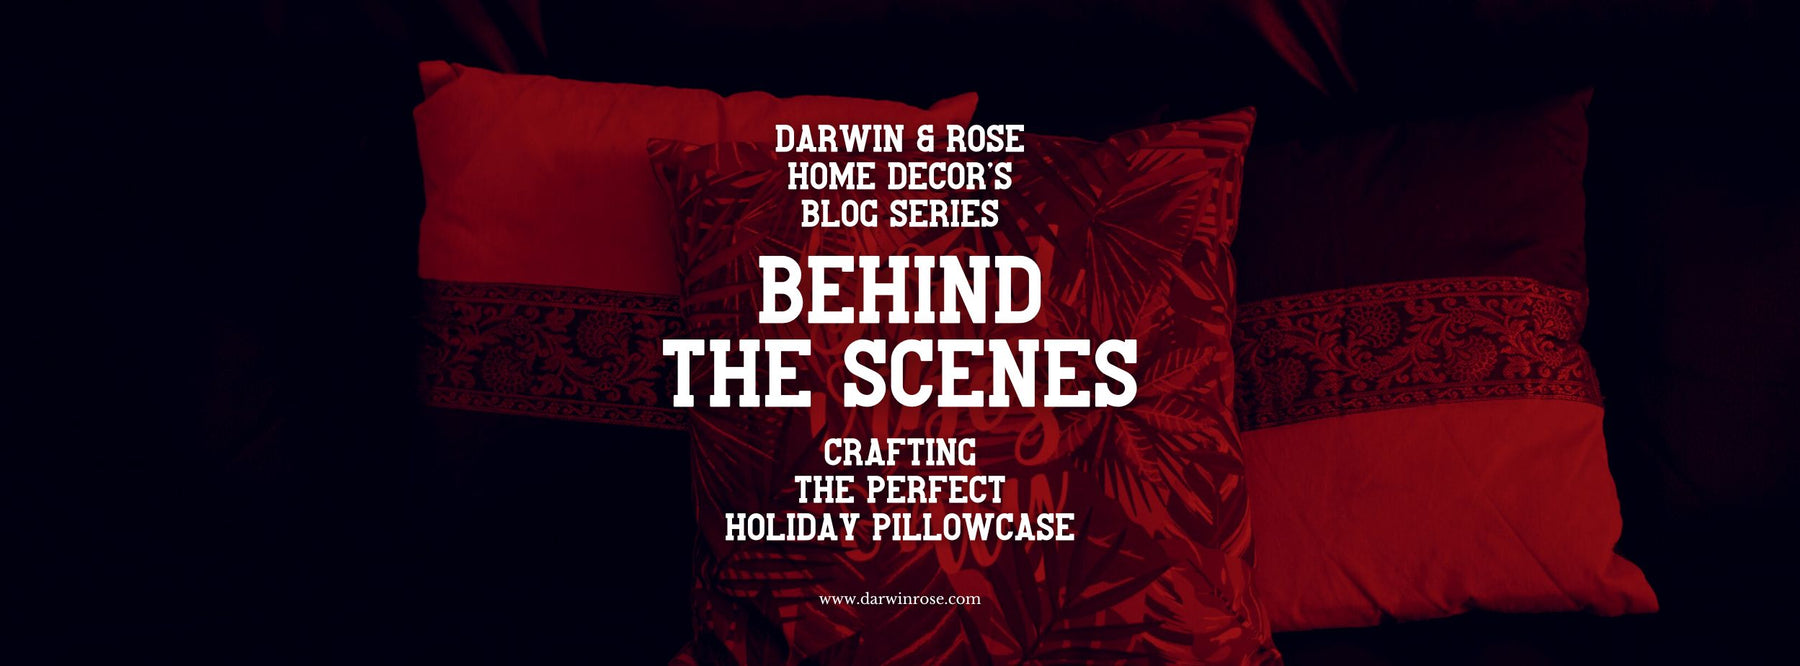 Behind the Scenes: Crafting the Perfect Holiday Pillowcase